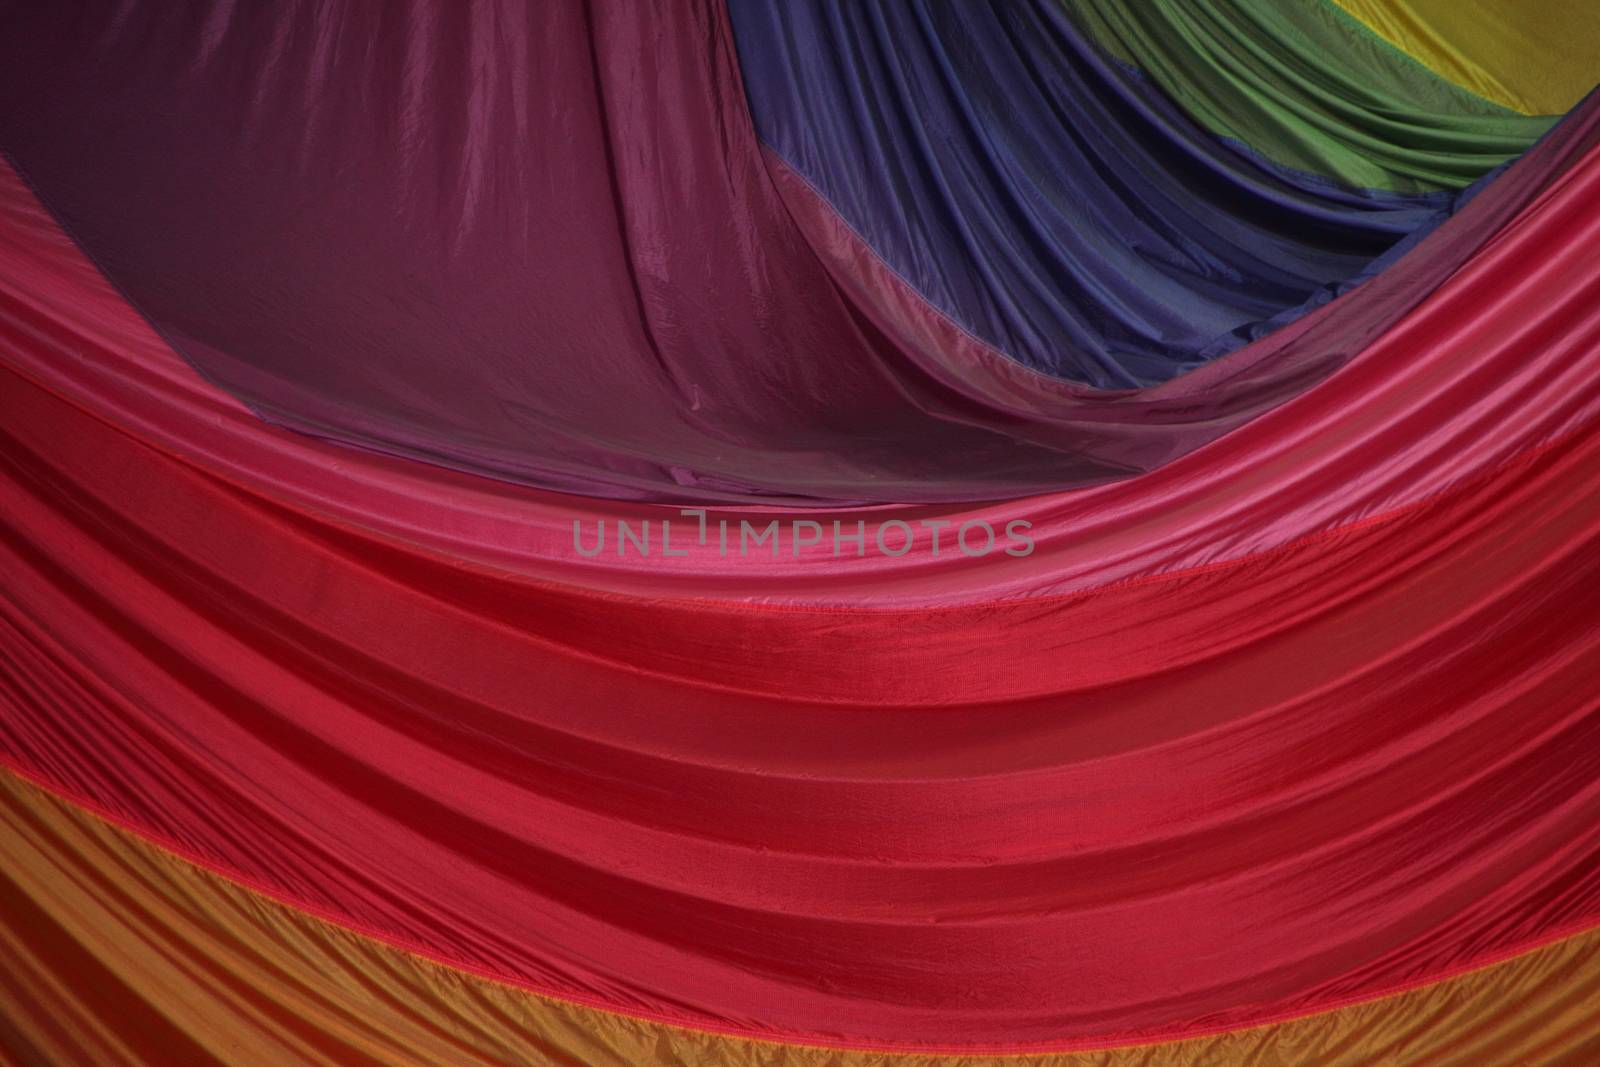 Segment of Folded Parachute Fabric in Colorful Layers